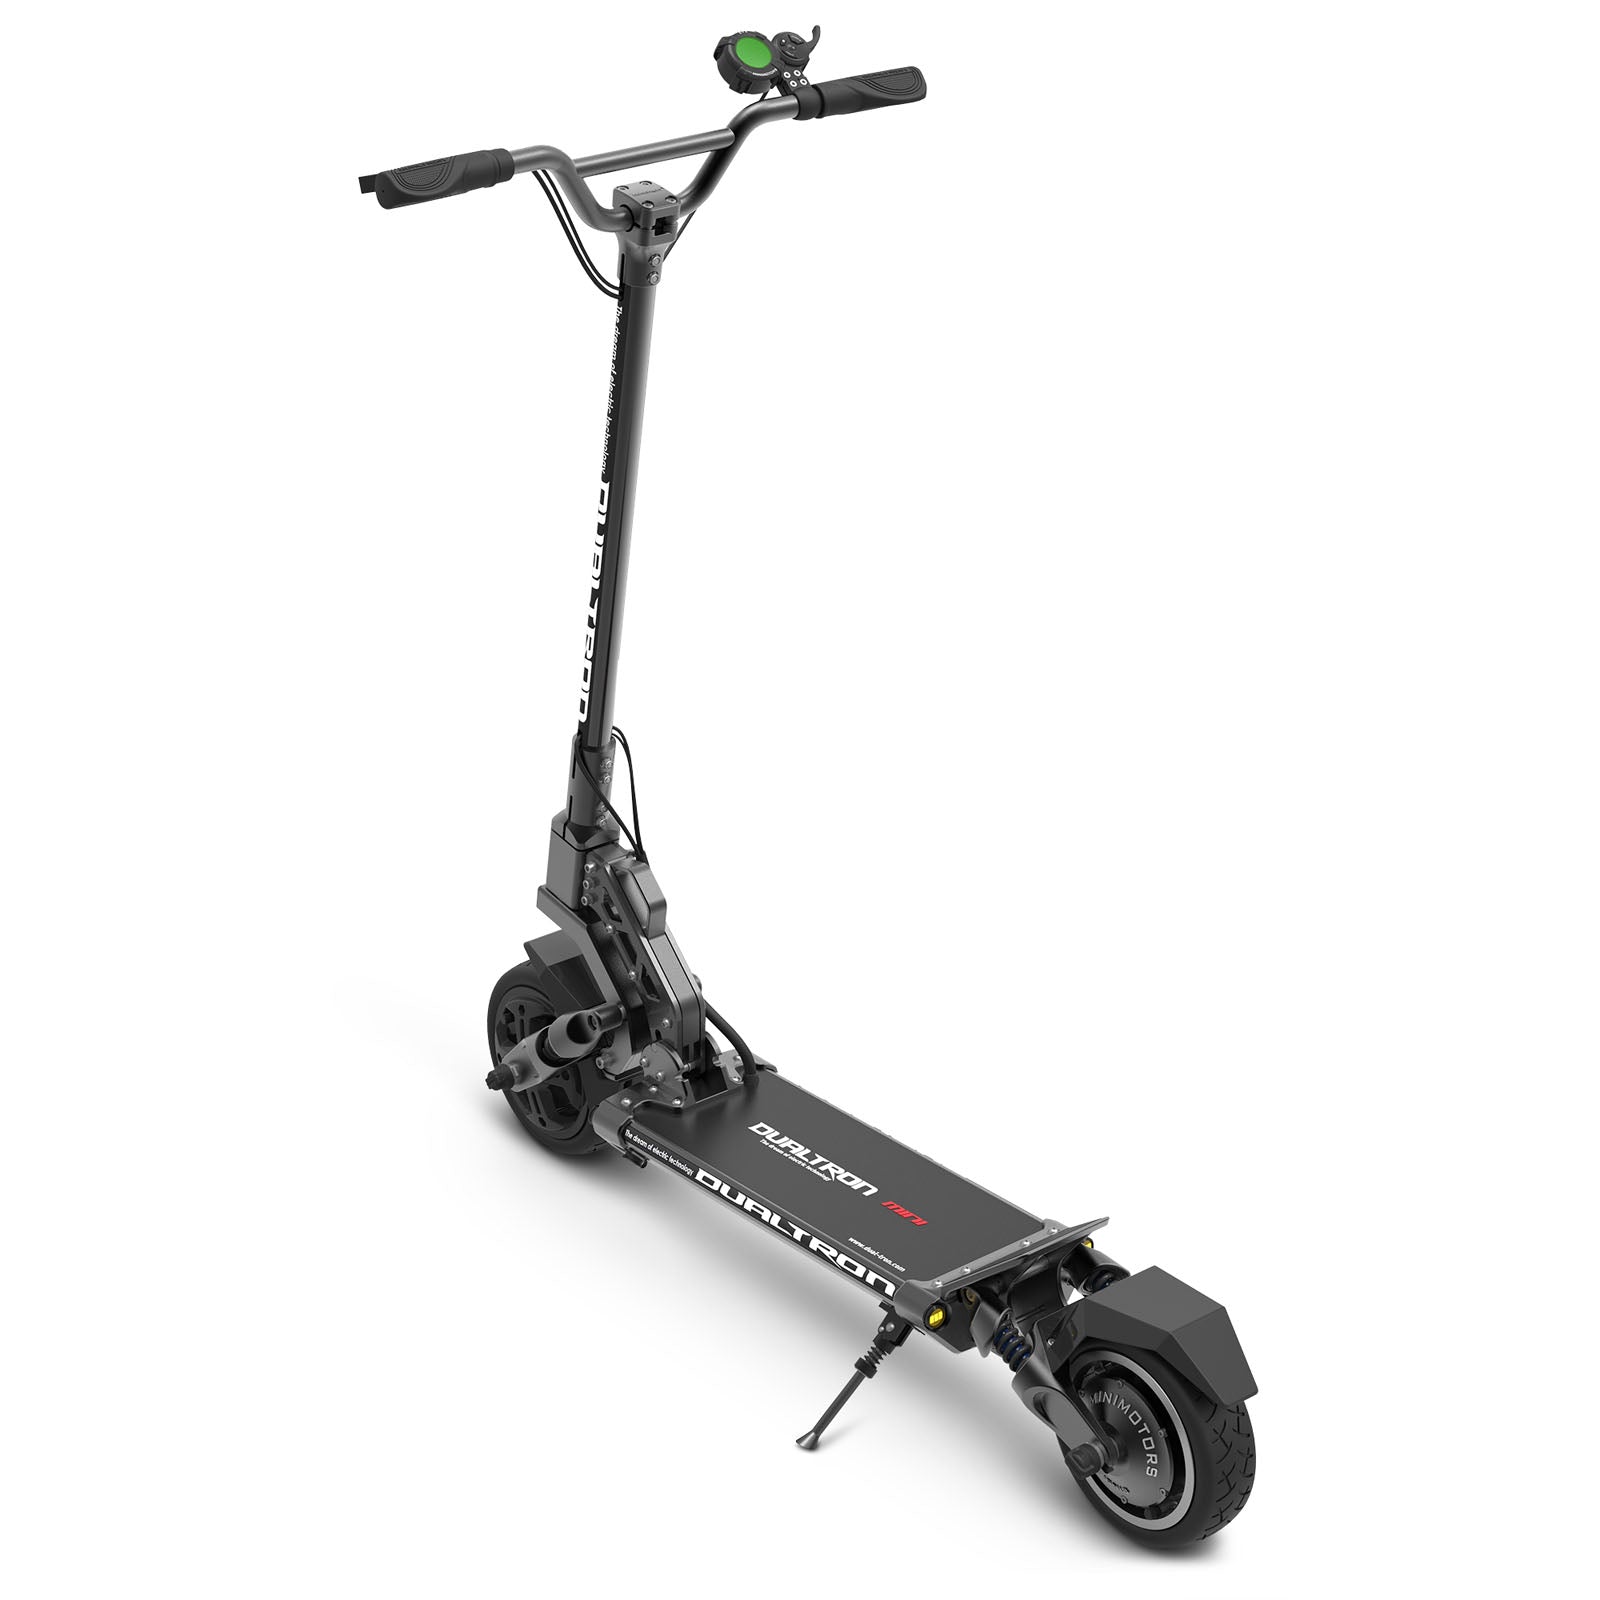 samtale Sicilien Produkt Dualtron Mini Electric Scooter | More Speed, Range and High Performance -  Minimotors USA